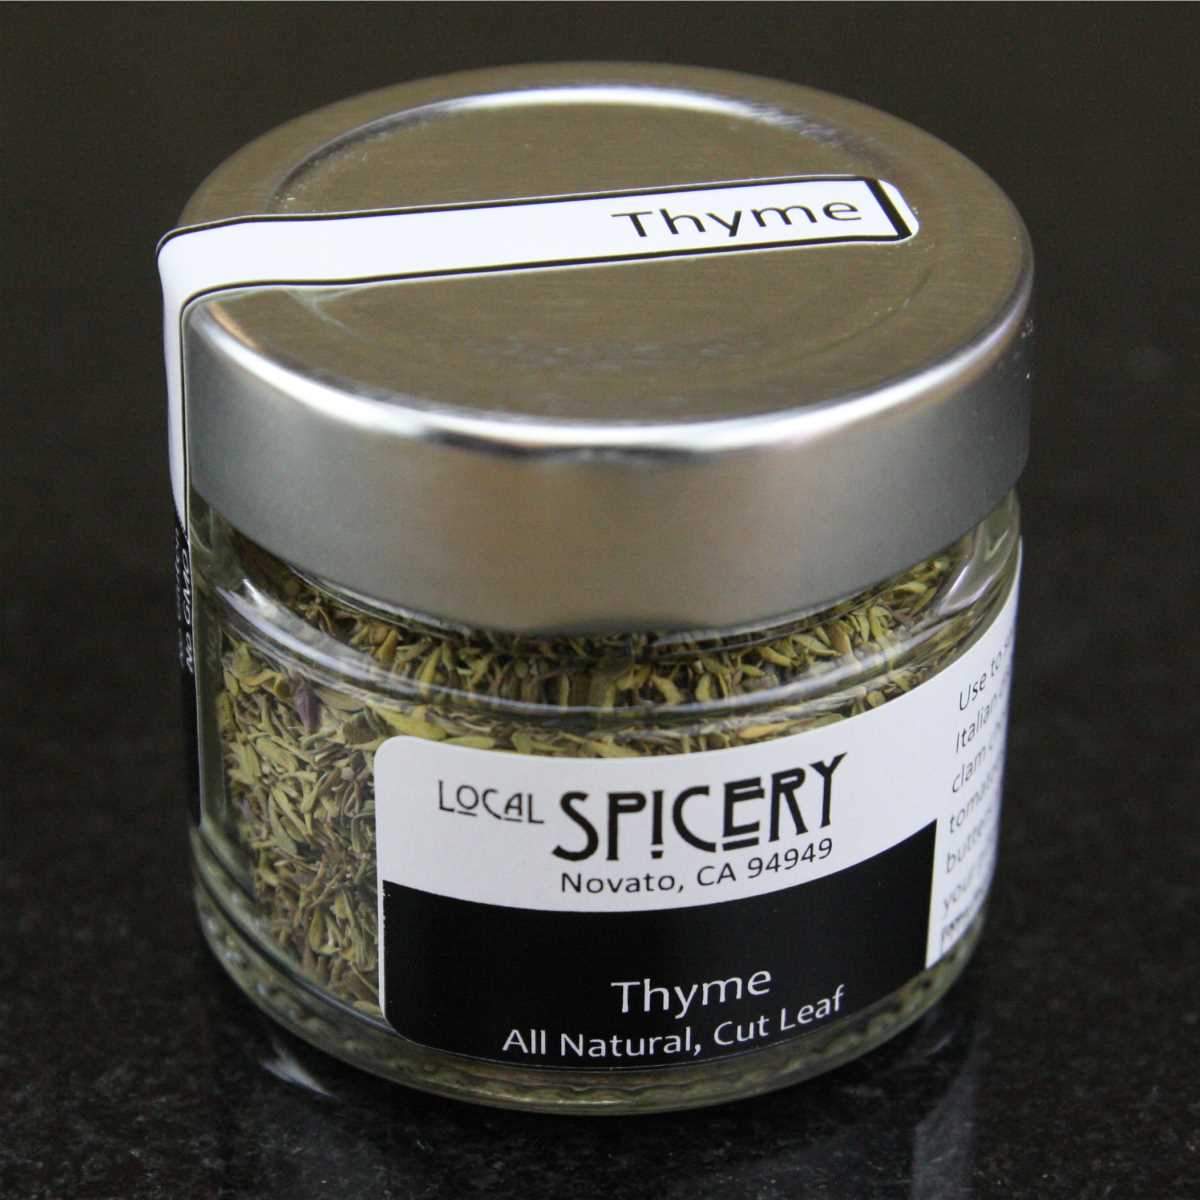 Local Spicery, Thyme, All Natural, Cut Leaf